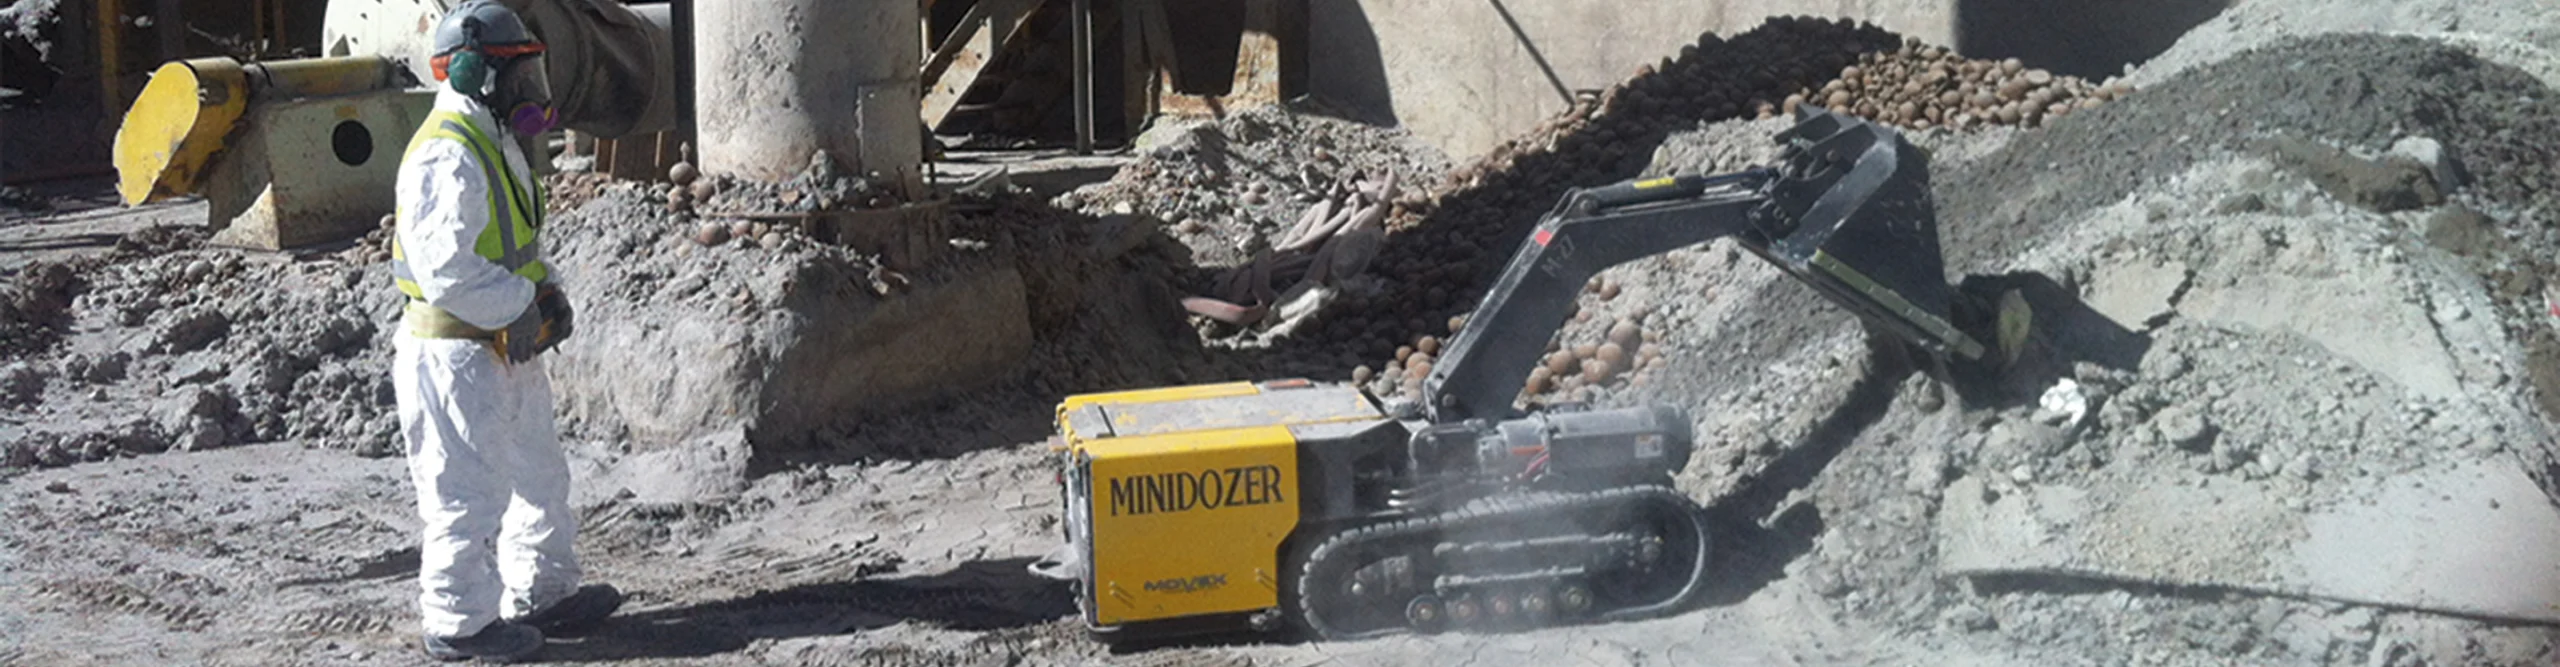 Confined spaces minidozer electric remote-controlled